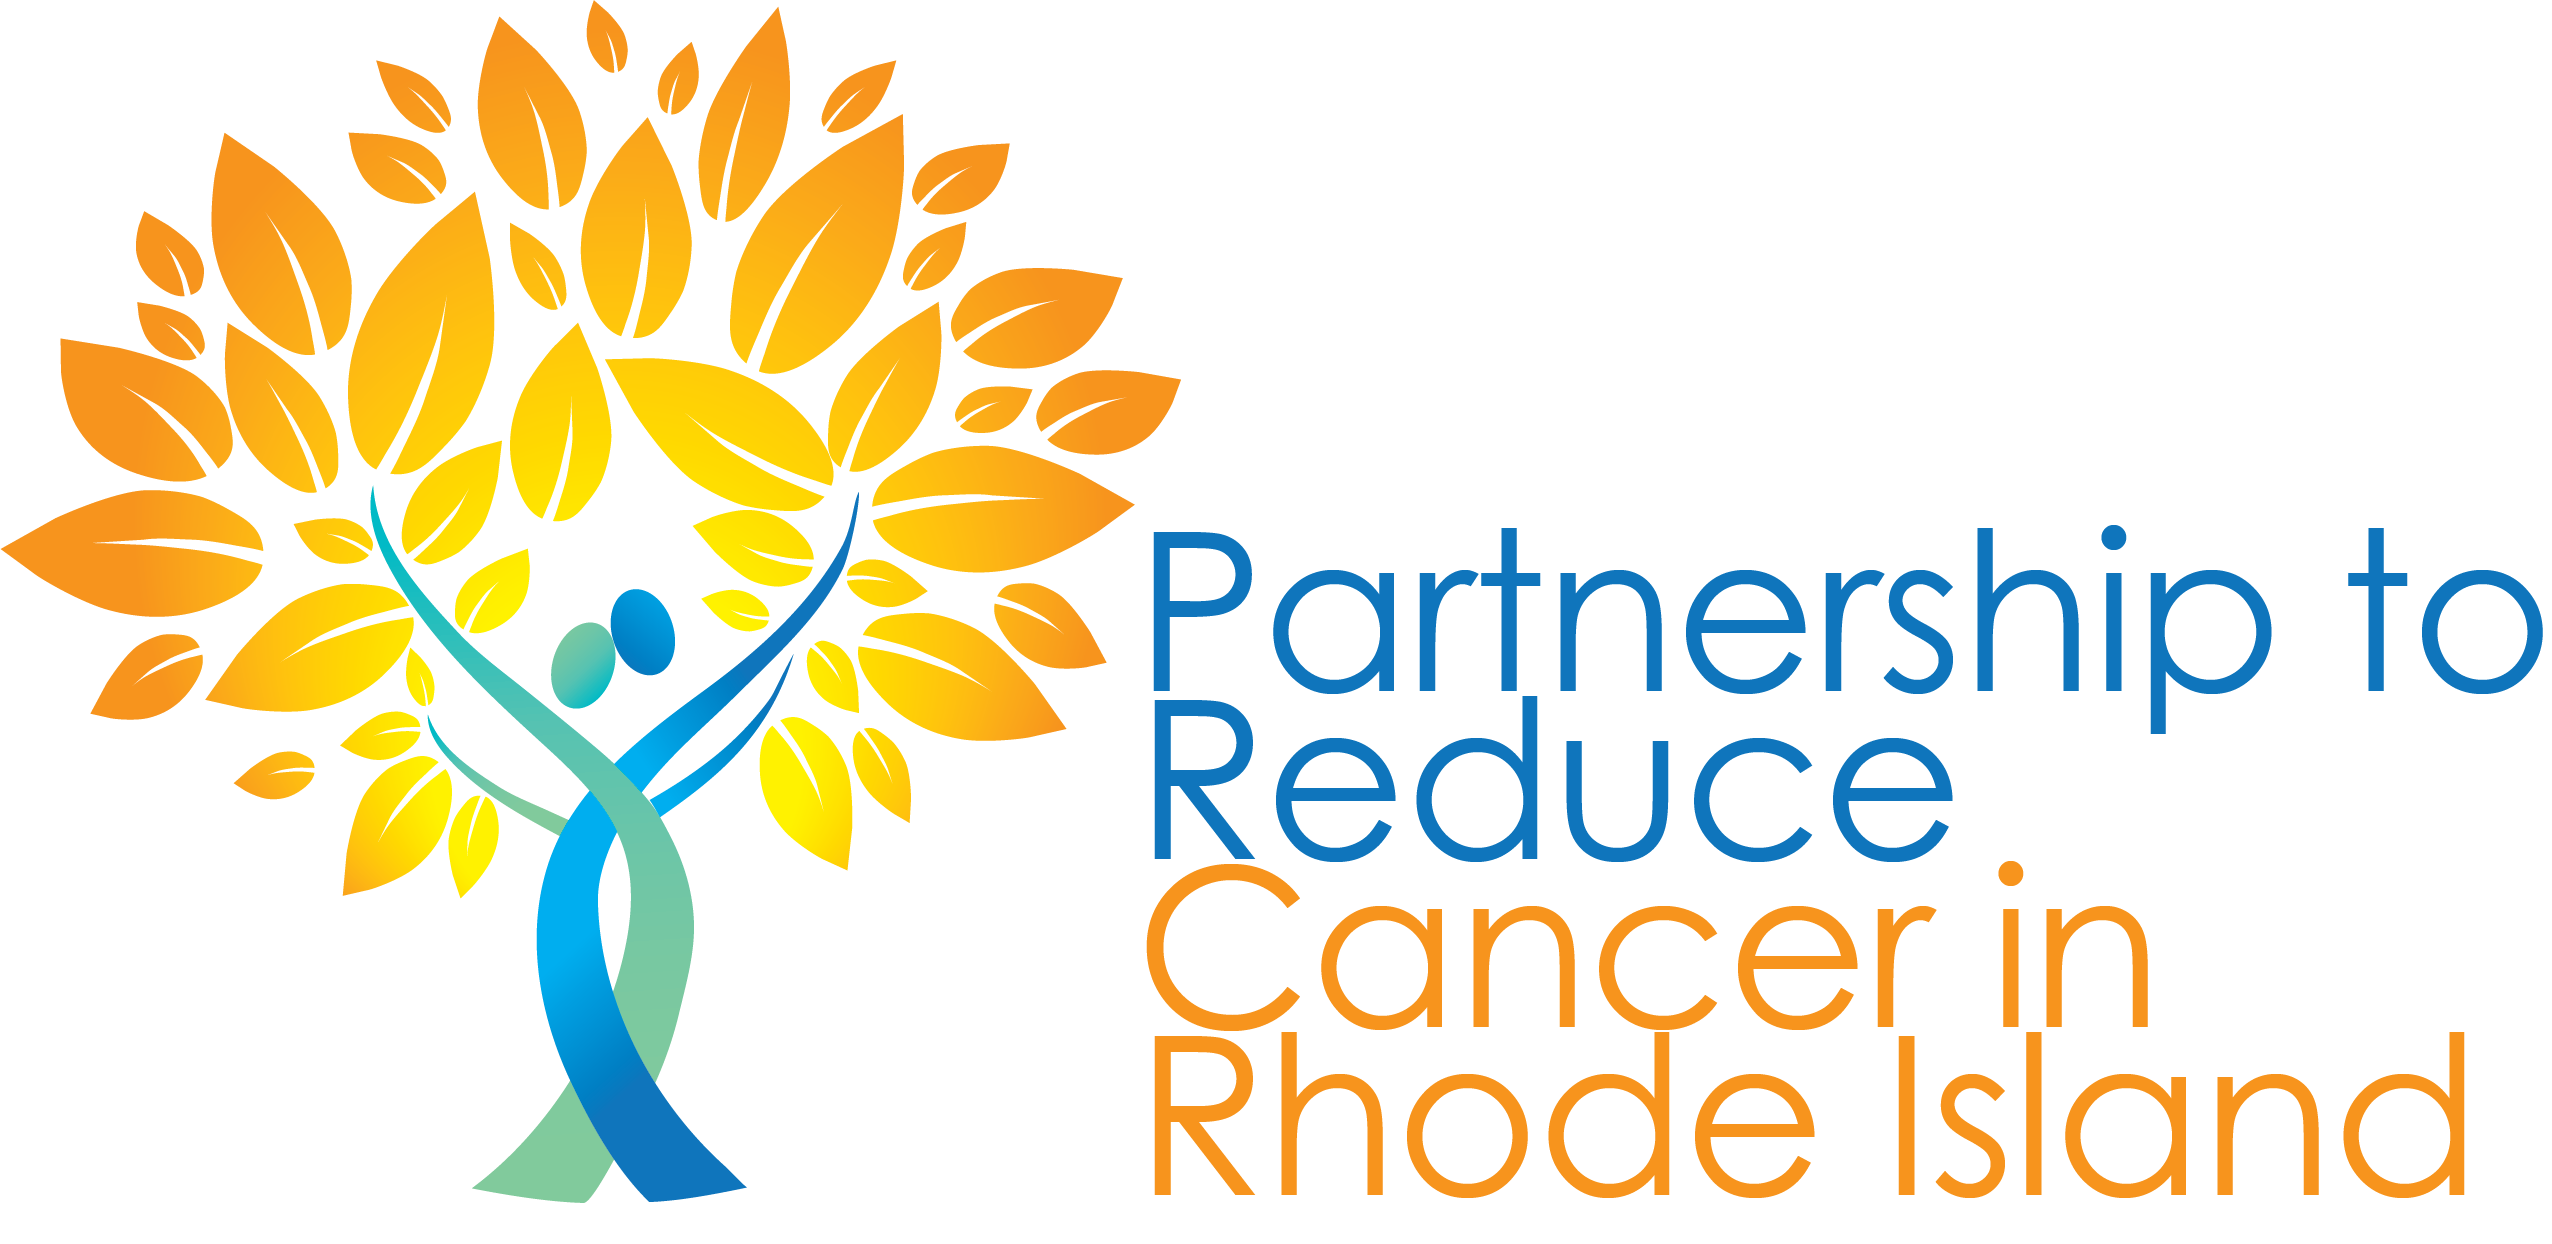 Advocacy Groups | <b>Partnership to Reduce Cancer in RI</b>